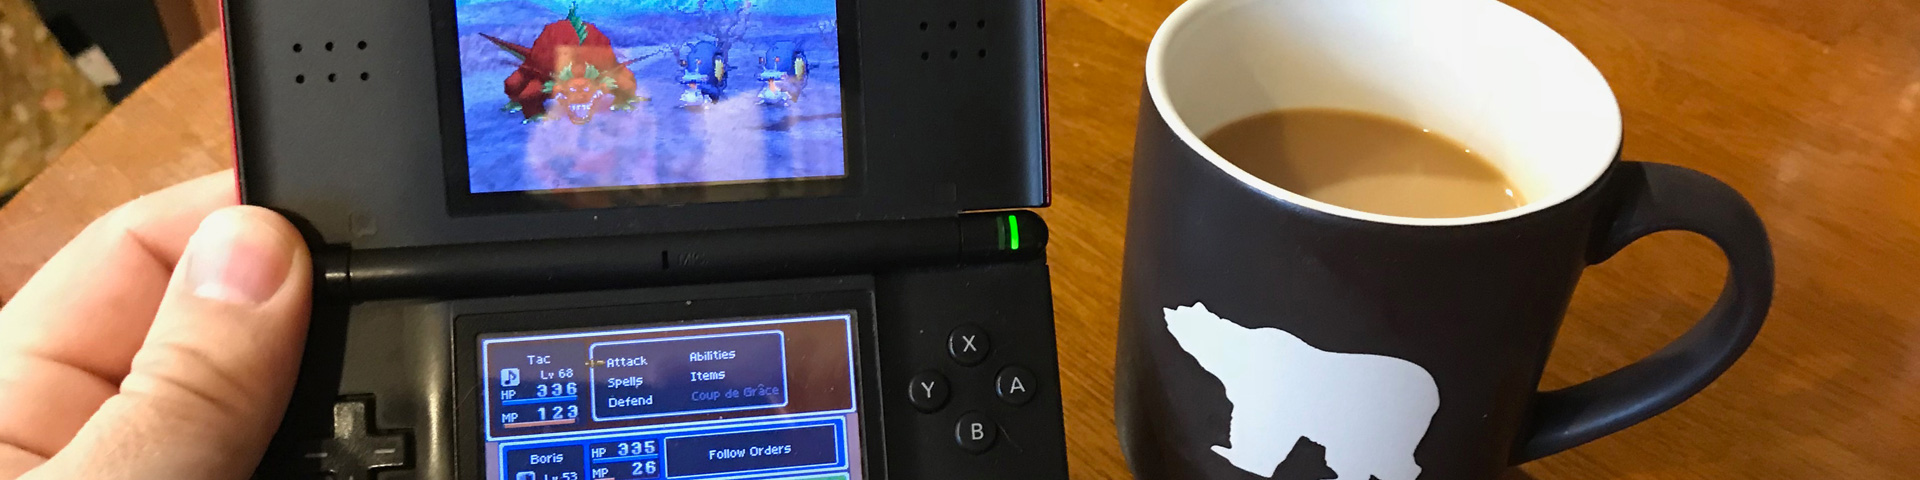 Dragon Quest IX appears on the screen of a Nintendo DS. Nearby is a mug filled with coffee.